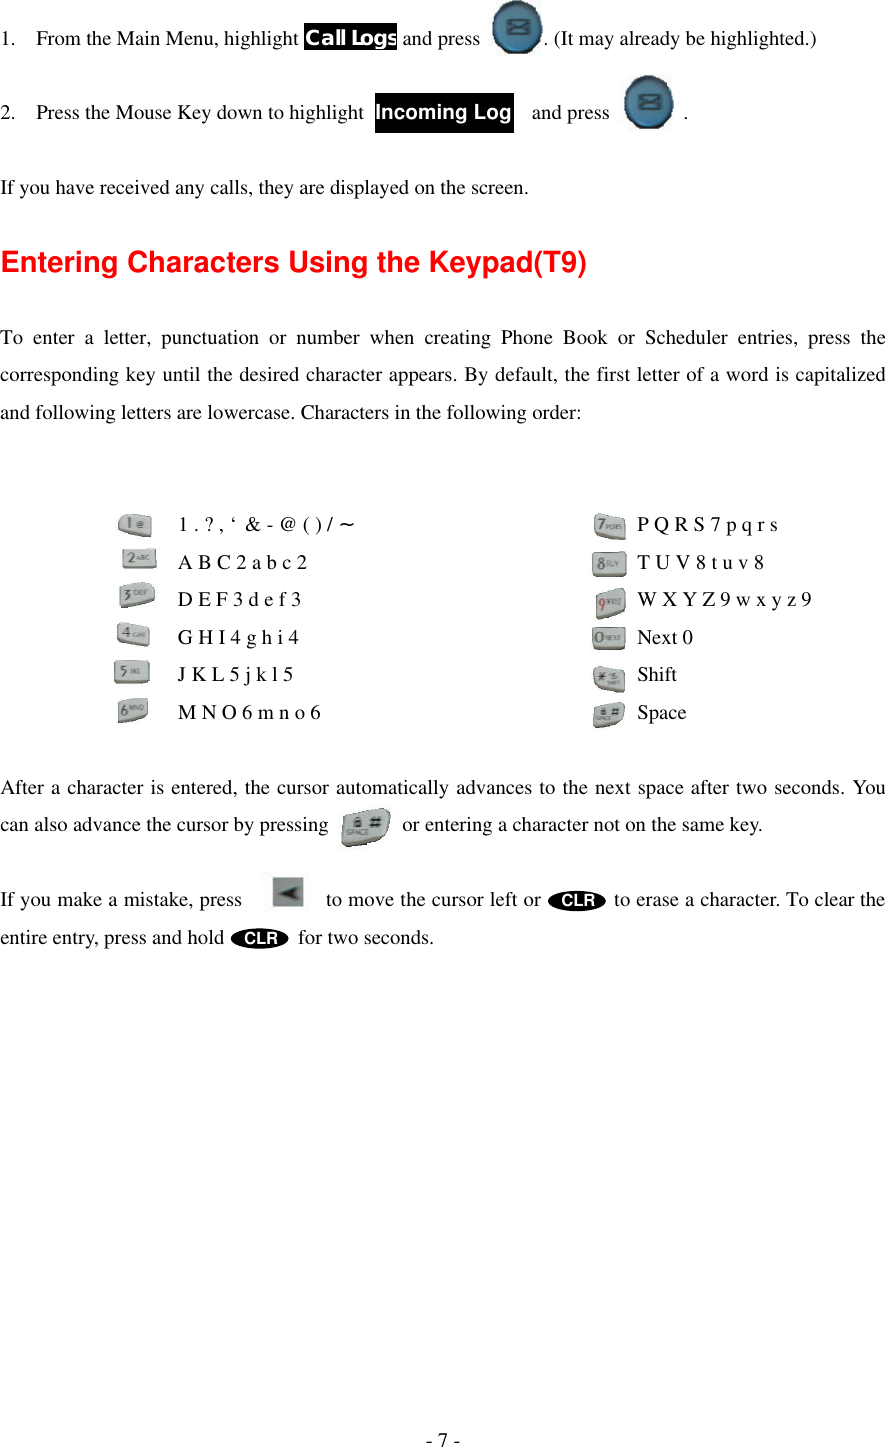 - 7 -  1. From the Main Menu, highlight Call Logs and press      . (It may already be highlighted.)  2. Press the Mouse Key down to highlight                and press       .  If you have received any calls, they are displayed on the screen.  Entering Characters Using the Keypad(T9)  To enter a letter, punctuation or number when creating Phone Book or Scheduler entries, press the corresponding key until the desired character appears. By default, the first letter of a word is capitalized and following letters are lowercase. Characters in the following order:            1 . ? , ‘ &amp; - @ ( ) / ~             P Q R S 7 p q r s          A B C 2 a b c 2                 T U V 8 t u v 8          D E F 3 d e f 3                  W X Y Z 9 w x y z 9          G H I 4 g h i 4             Next 0          J K L 5 j k l 5             Shift          M N O 6 m n o 6             Space  After a character is entered, the cursor automatically advances to the next space after two seconds. You can also advance the cursor by pressing       or entering a character not on the same key.  If you make a mistake, press        to move the cursor left or       to erase a character. To clear the entire entry, press and hold       for two seconds.  Incoming Log 1  7PQRS  9WXYZ  8TUV  6MNO  5J4G3DEF  ABC   1   *   0Space  CLR CLR 